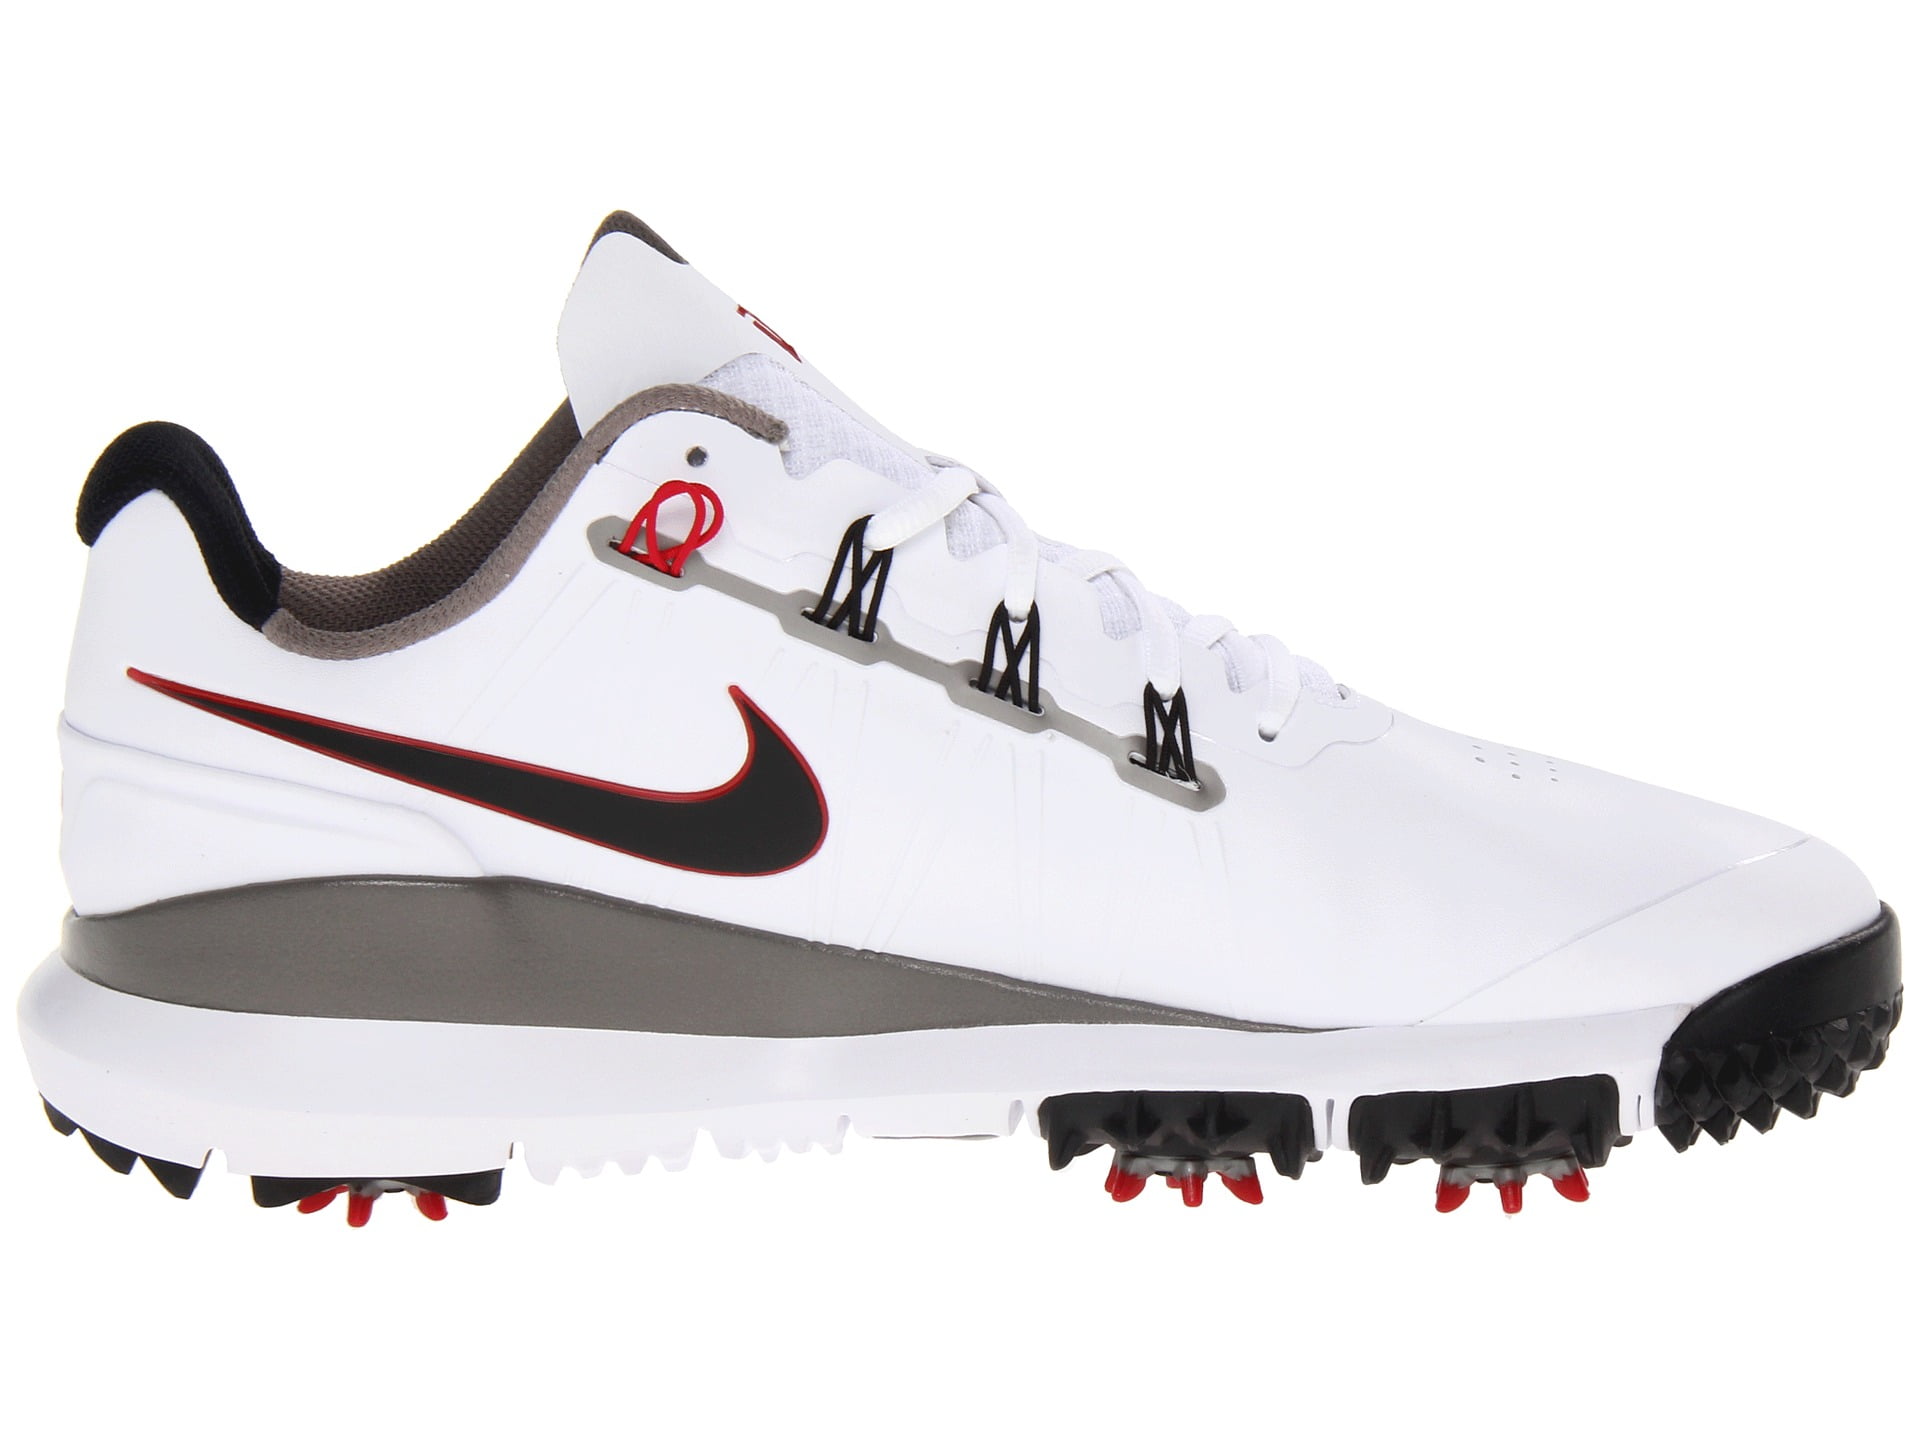 Nike TW 14 Tiger Woods Golf Shoes 